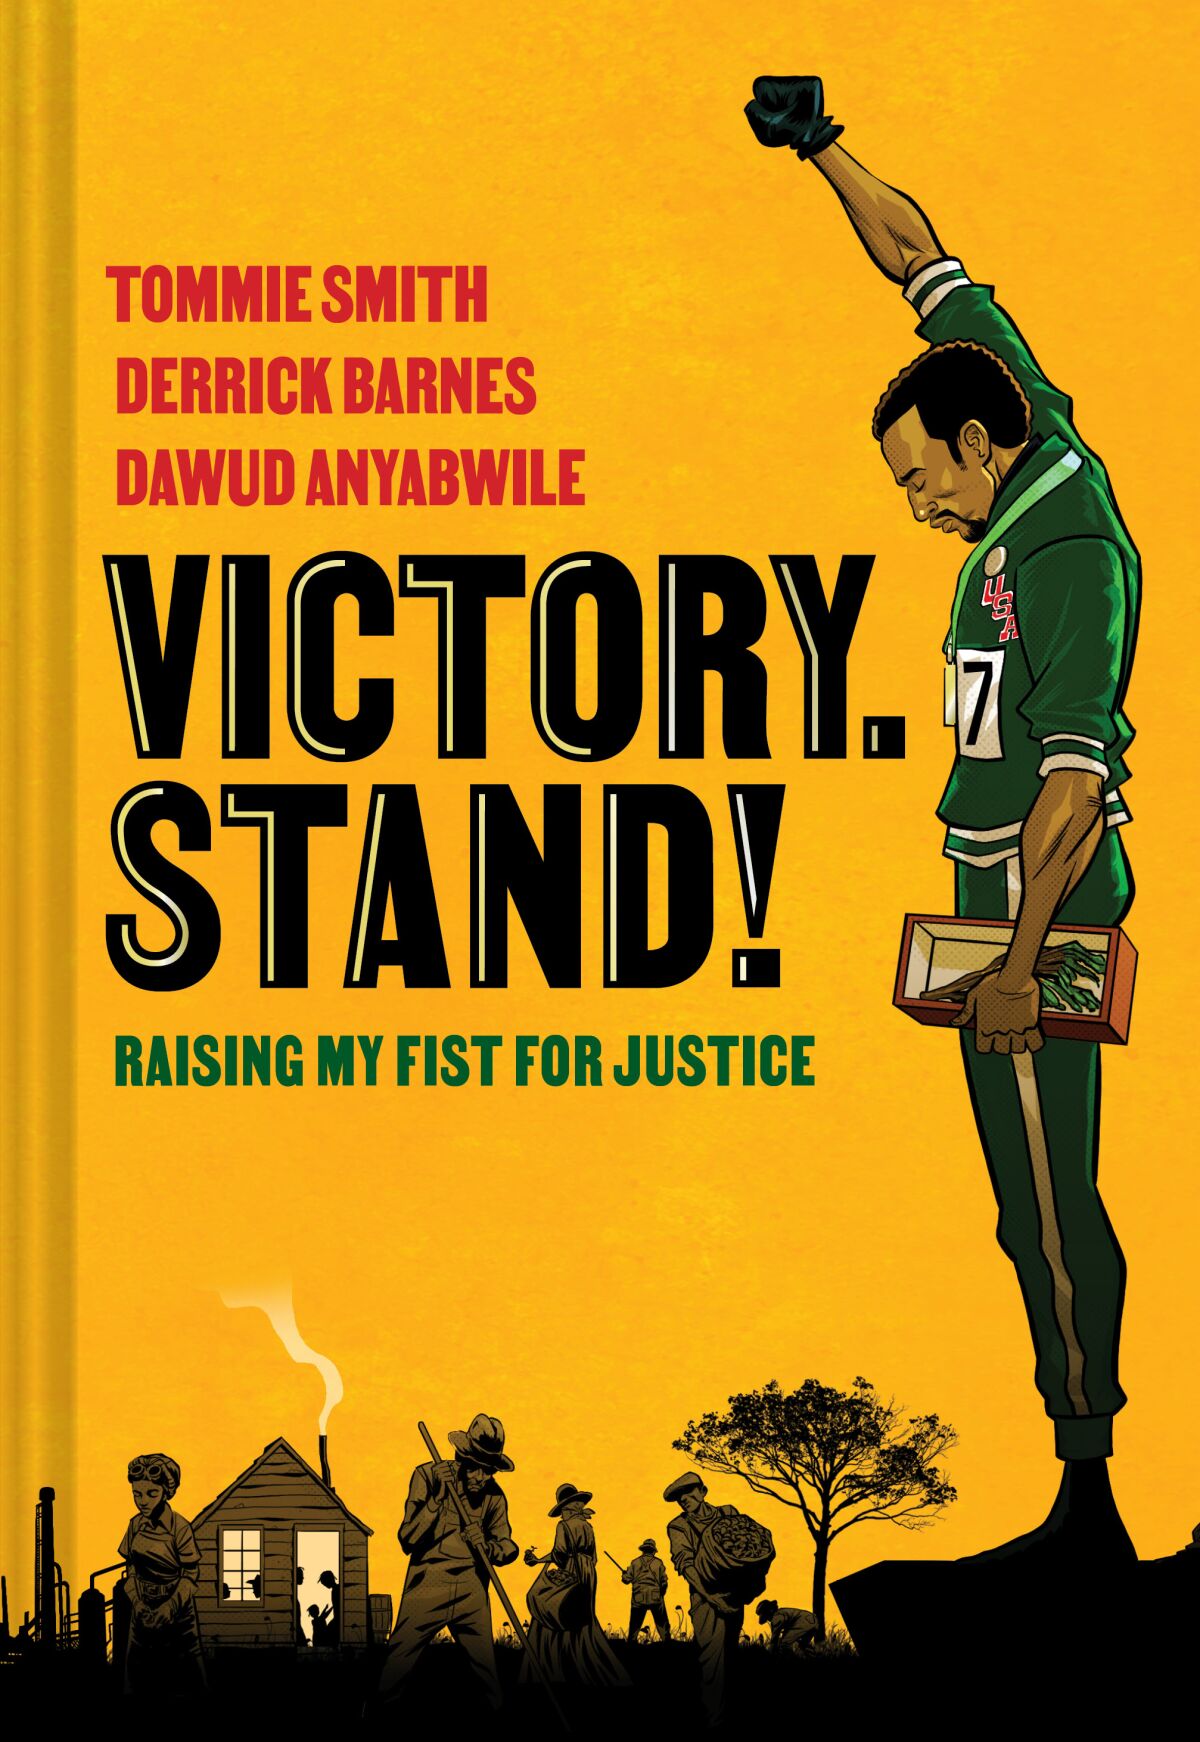 This cover image released by Norton Young Readers shows “Victory. Stand! Raising My Fist for Justice,” a graphic novel by Olympic gold medalist and civil rights activist Tommie Smith, releasing Sept. 27. (Norton Young Readers via AP)